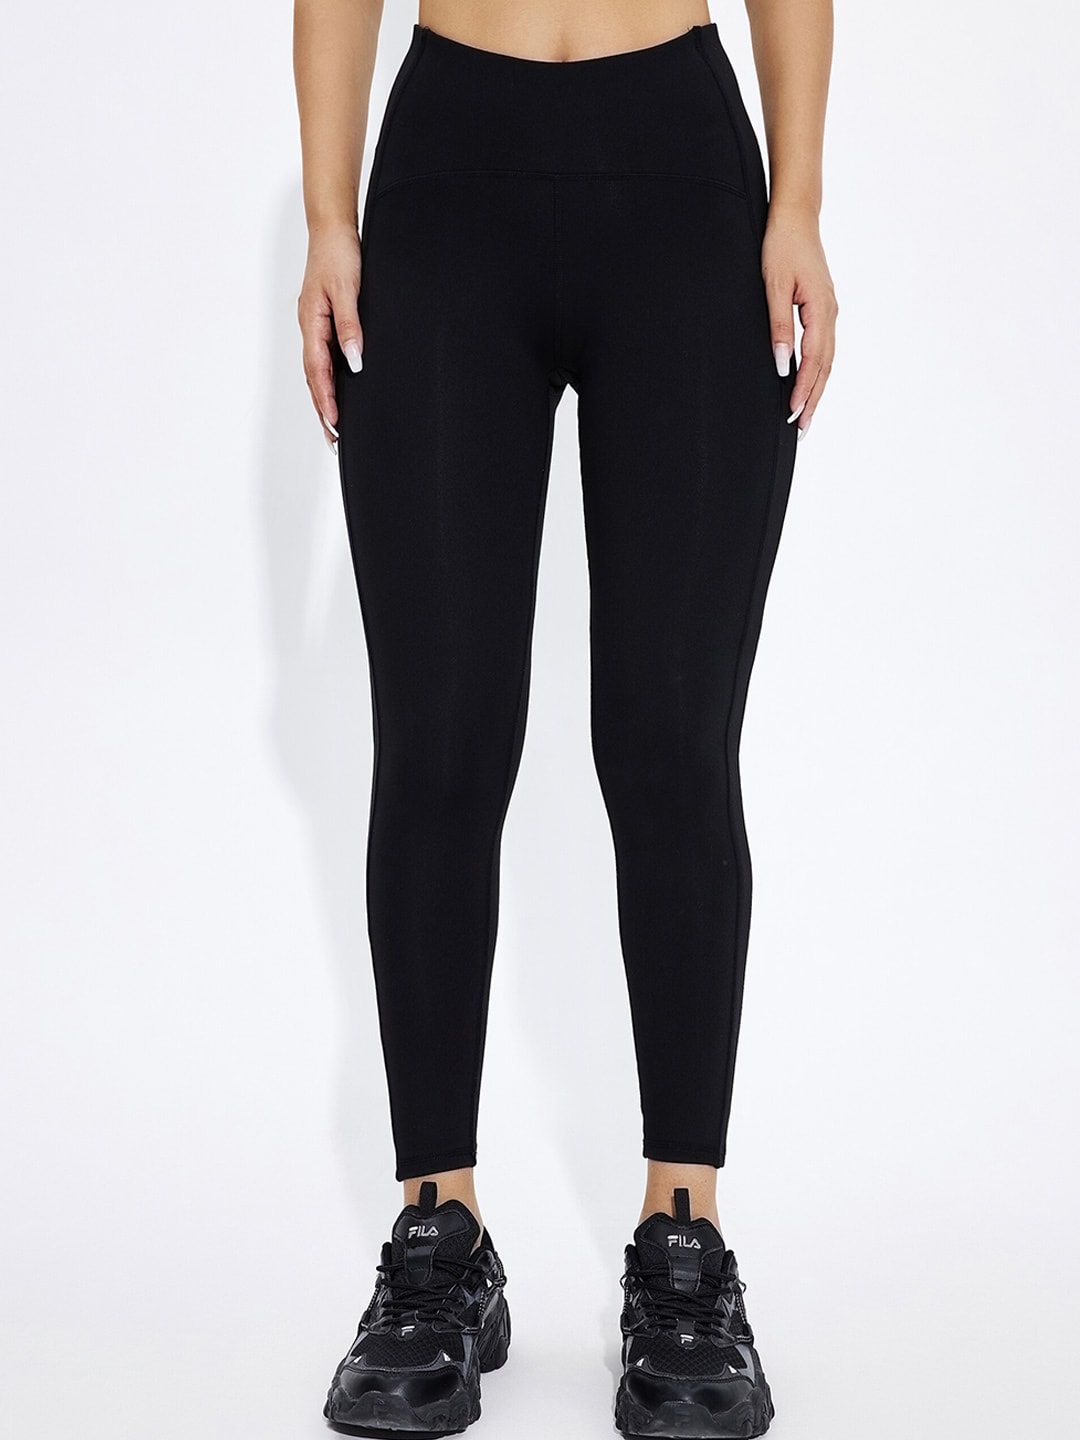 URBANIC Women Black Solid Gym Tights Price in India